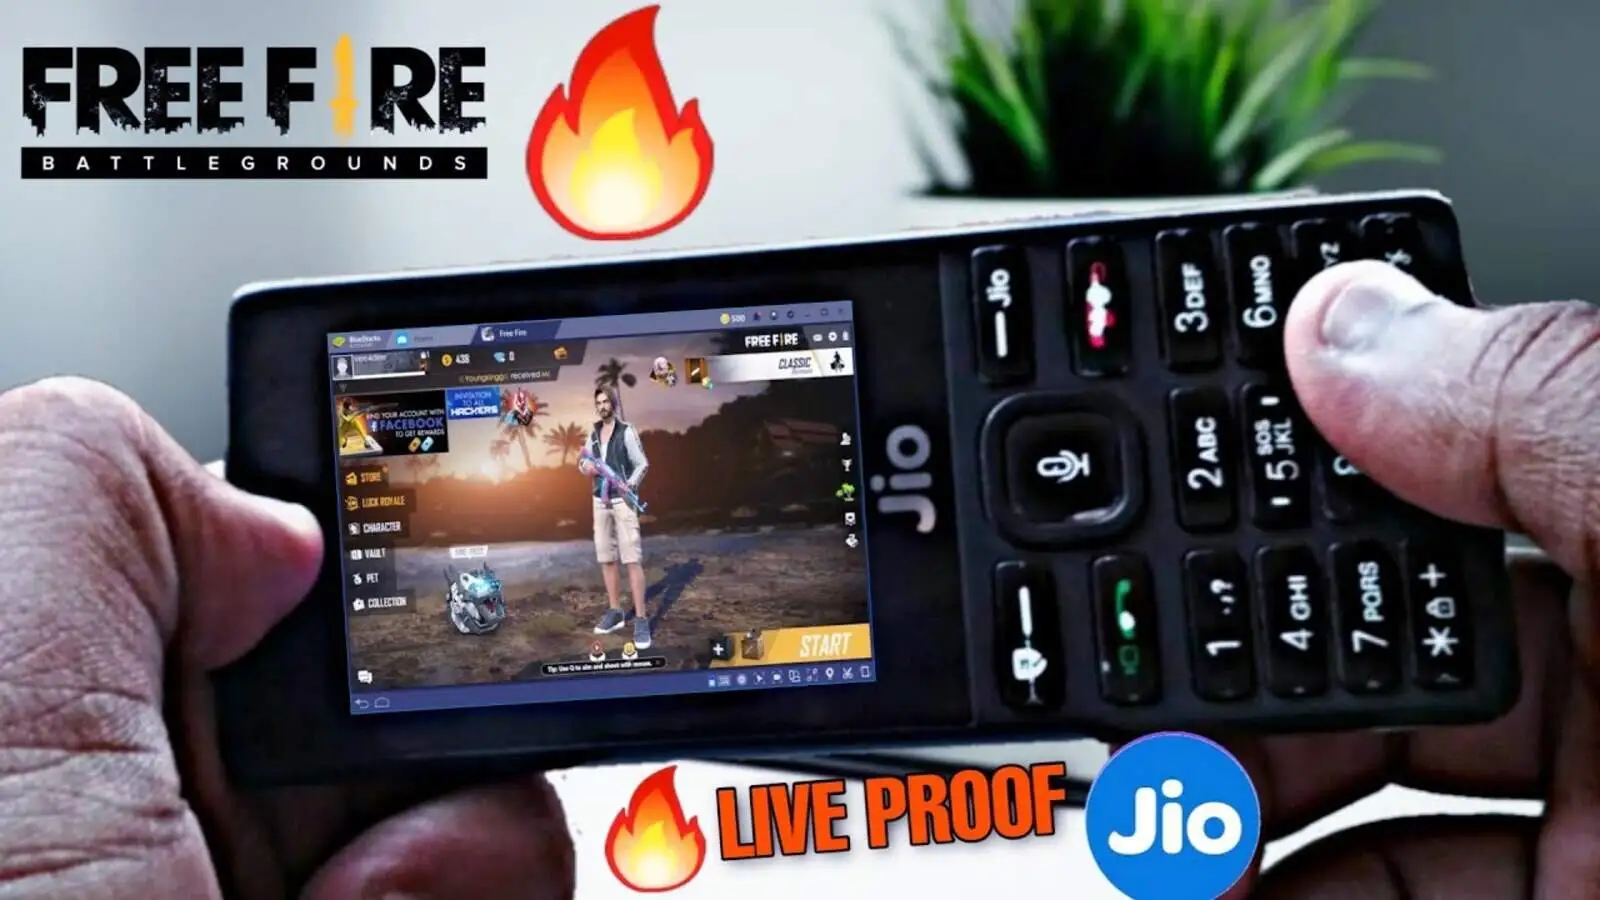 How To Play and Download Free Fire Game Apk on Jio Phone in 2022